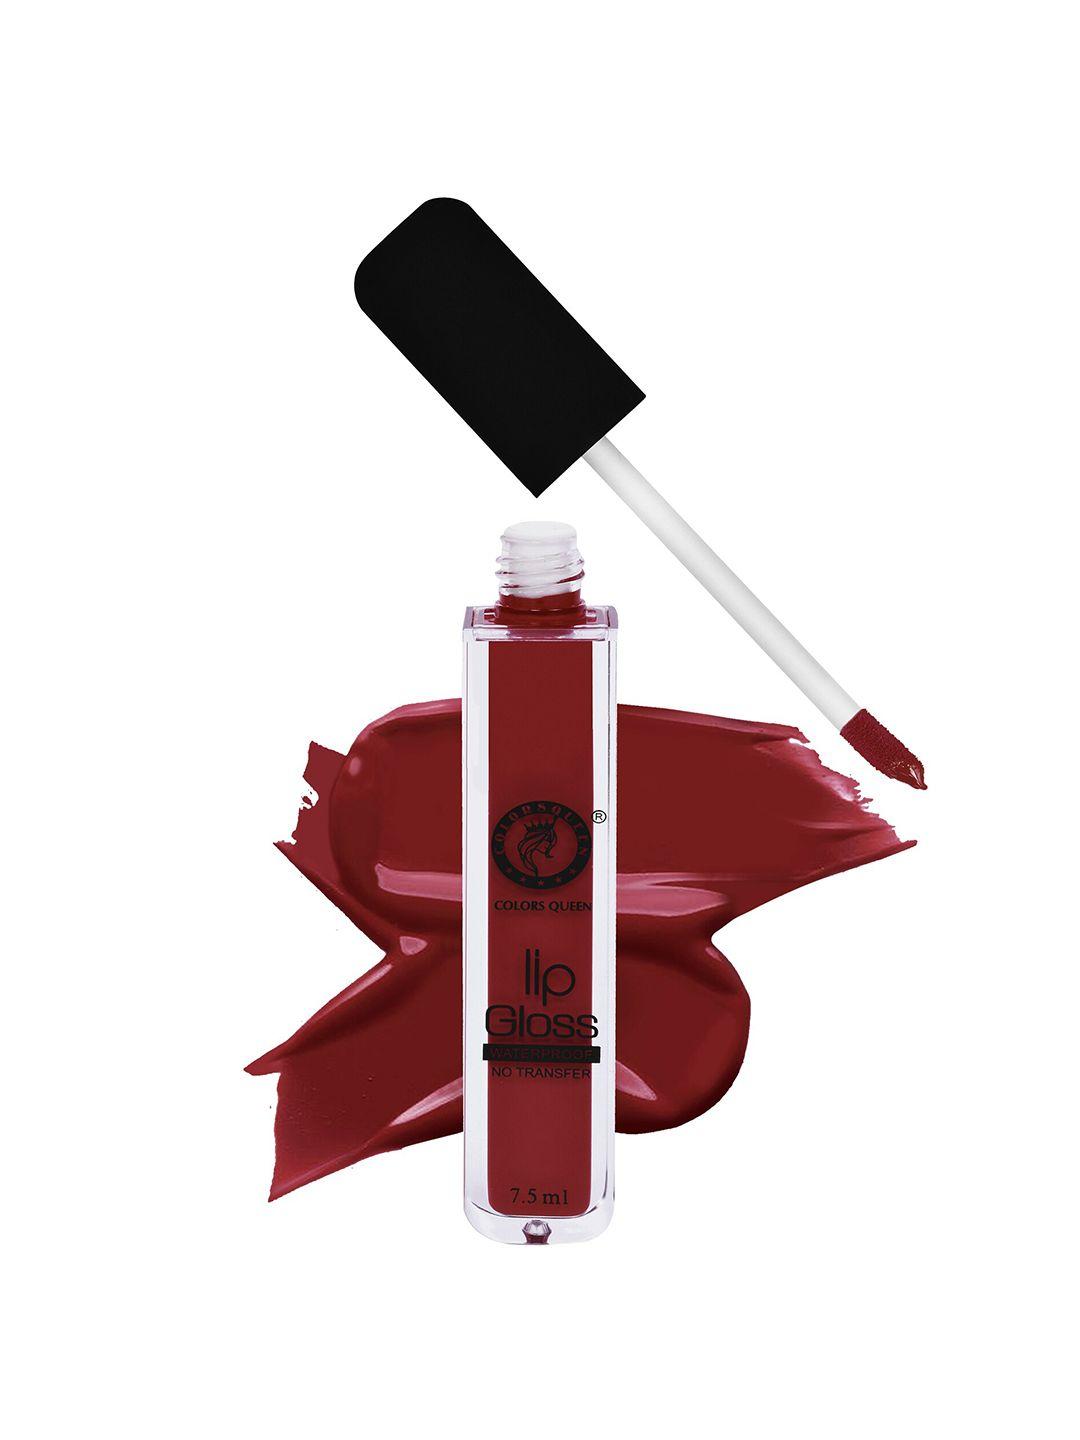 colors queen non transfer water proof lip gloss 7.5 ml - maroon 06